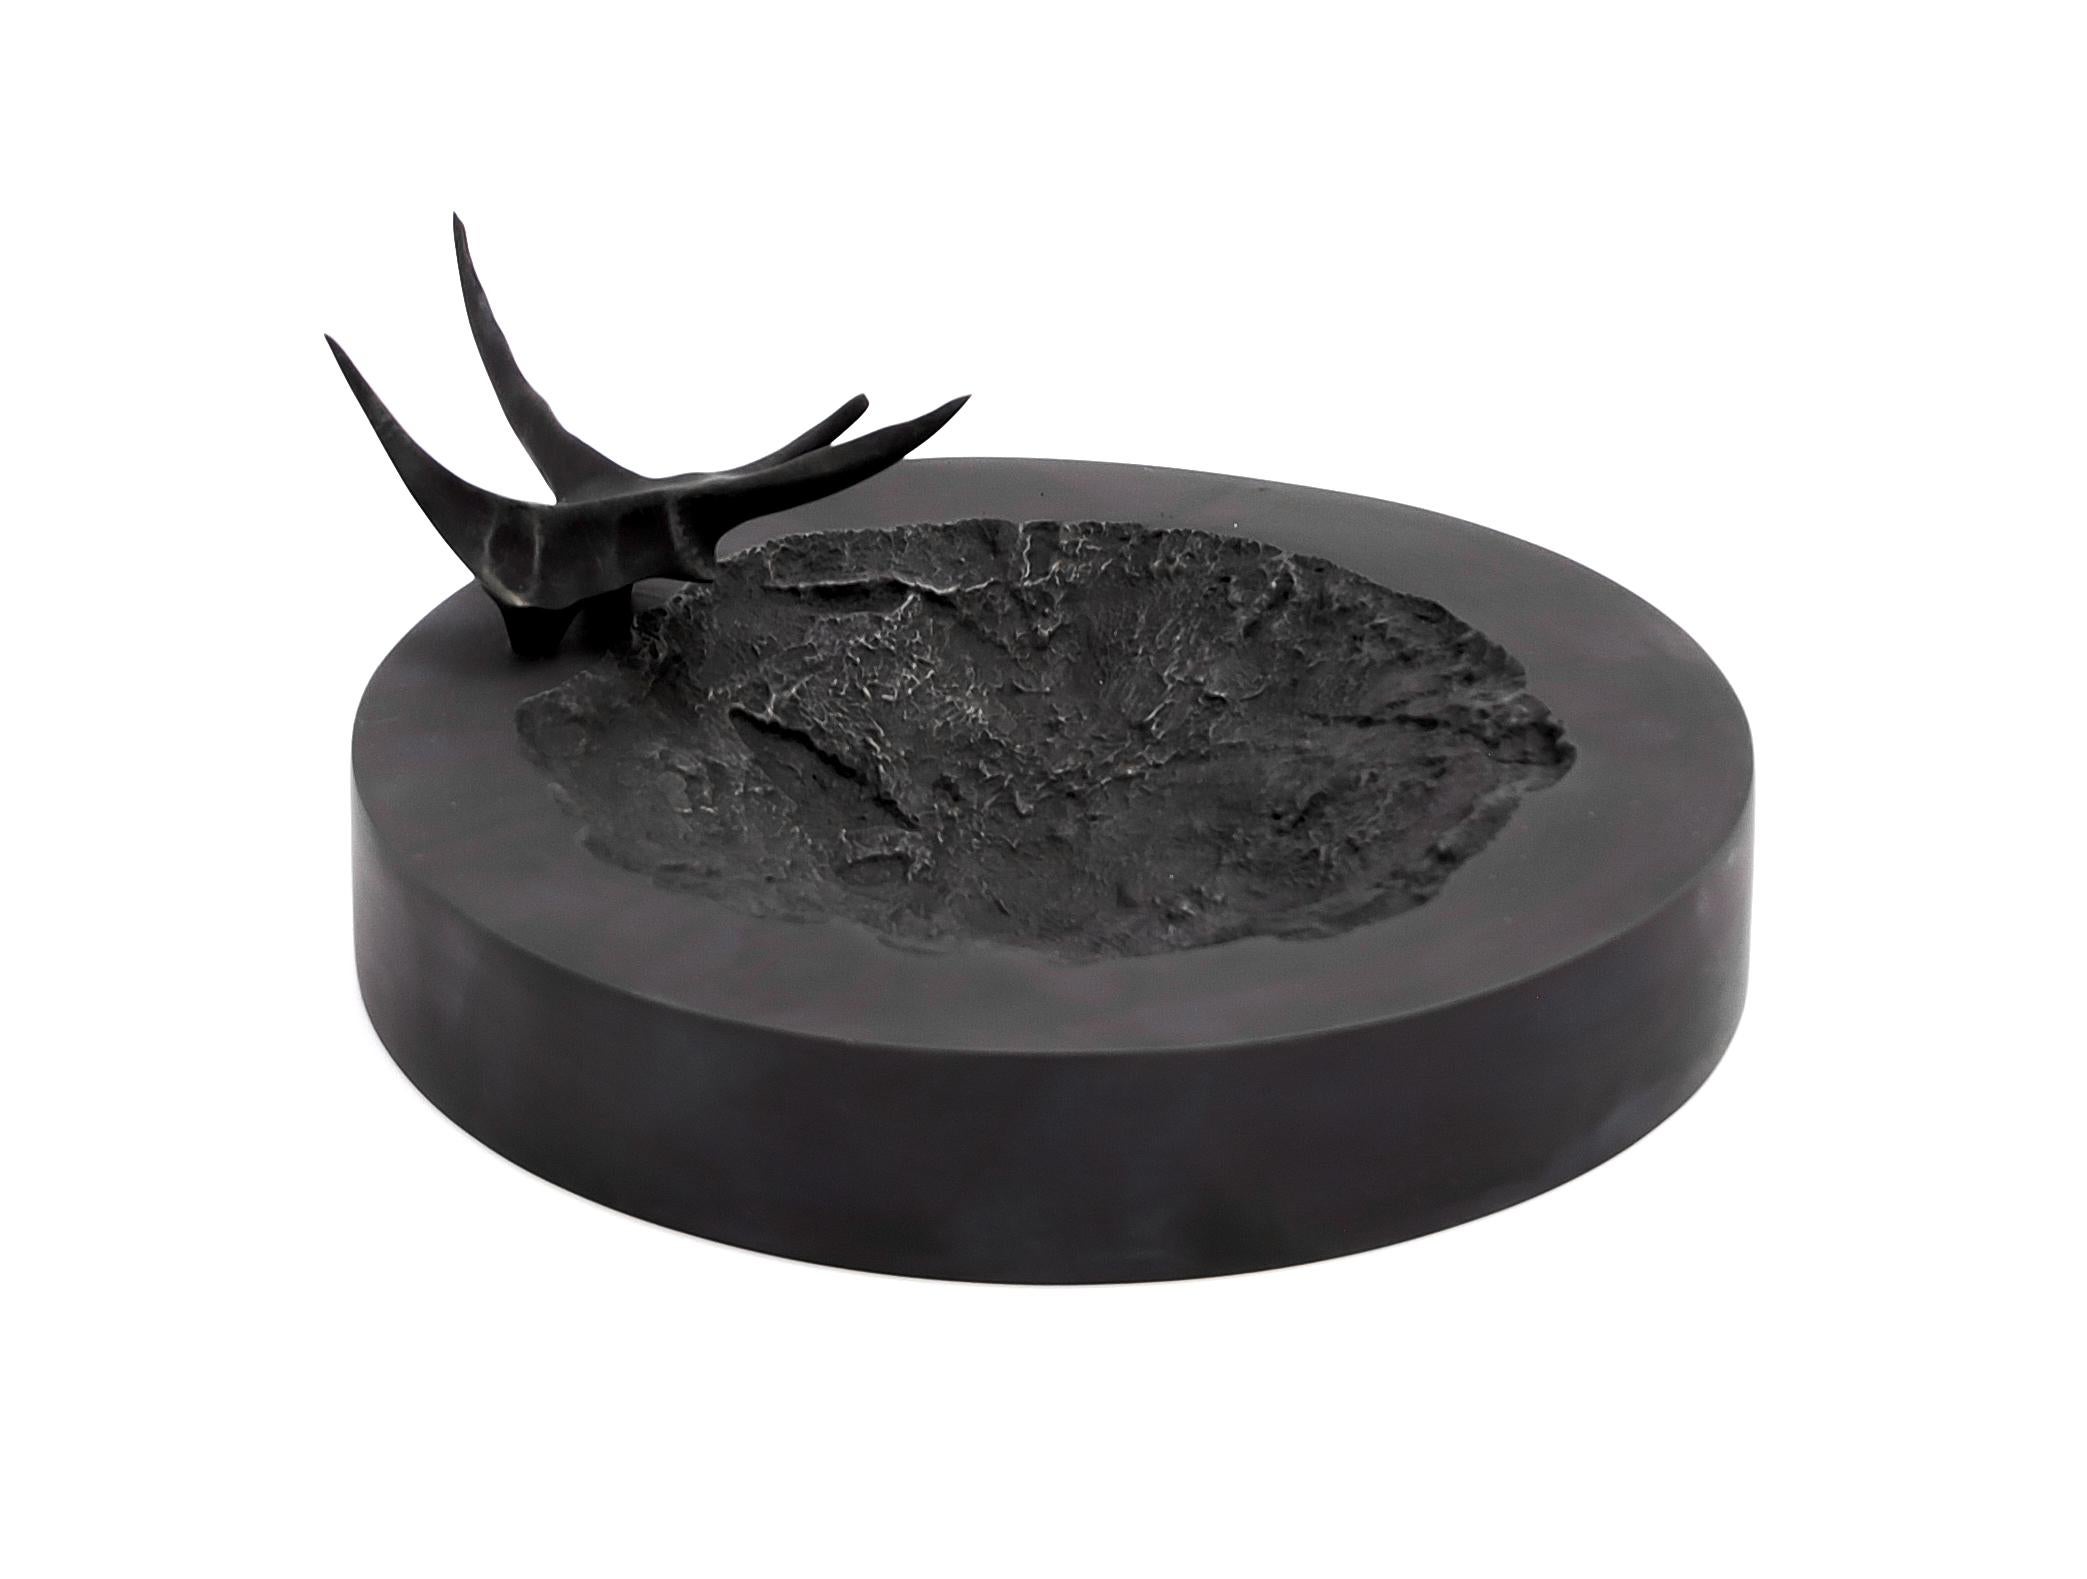 Rod bowl by Fakasaka Design
Dimensions: W 19.5 cm D 19.5 cm H 3.5cm.
Materials: dark bronze.

Rod bowl / ashtray / centerpiece / candle holder / card holder.

 FAKASAKA is a design company focused on production of high-end furniture, lighting,